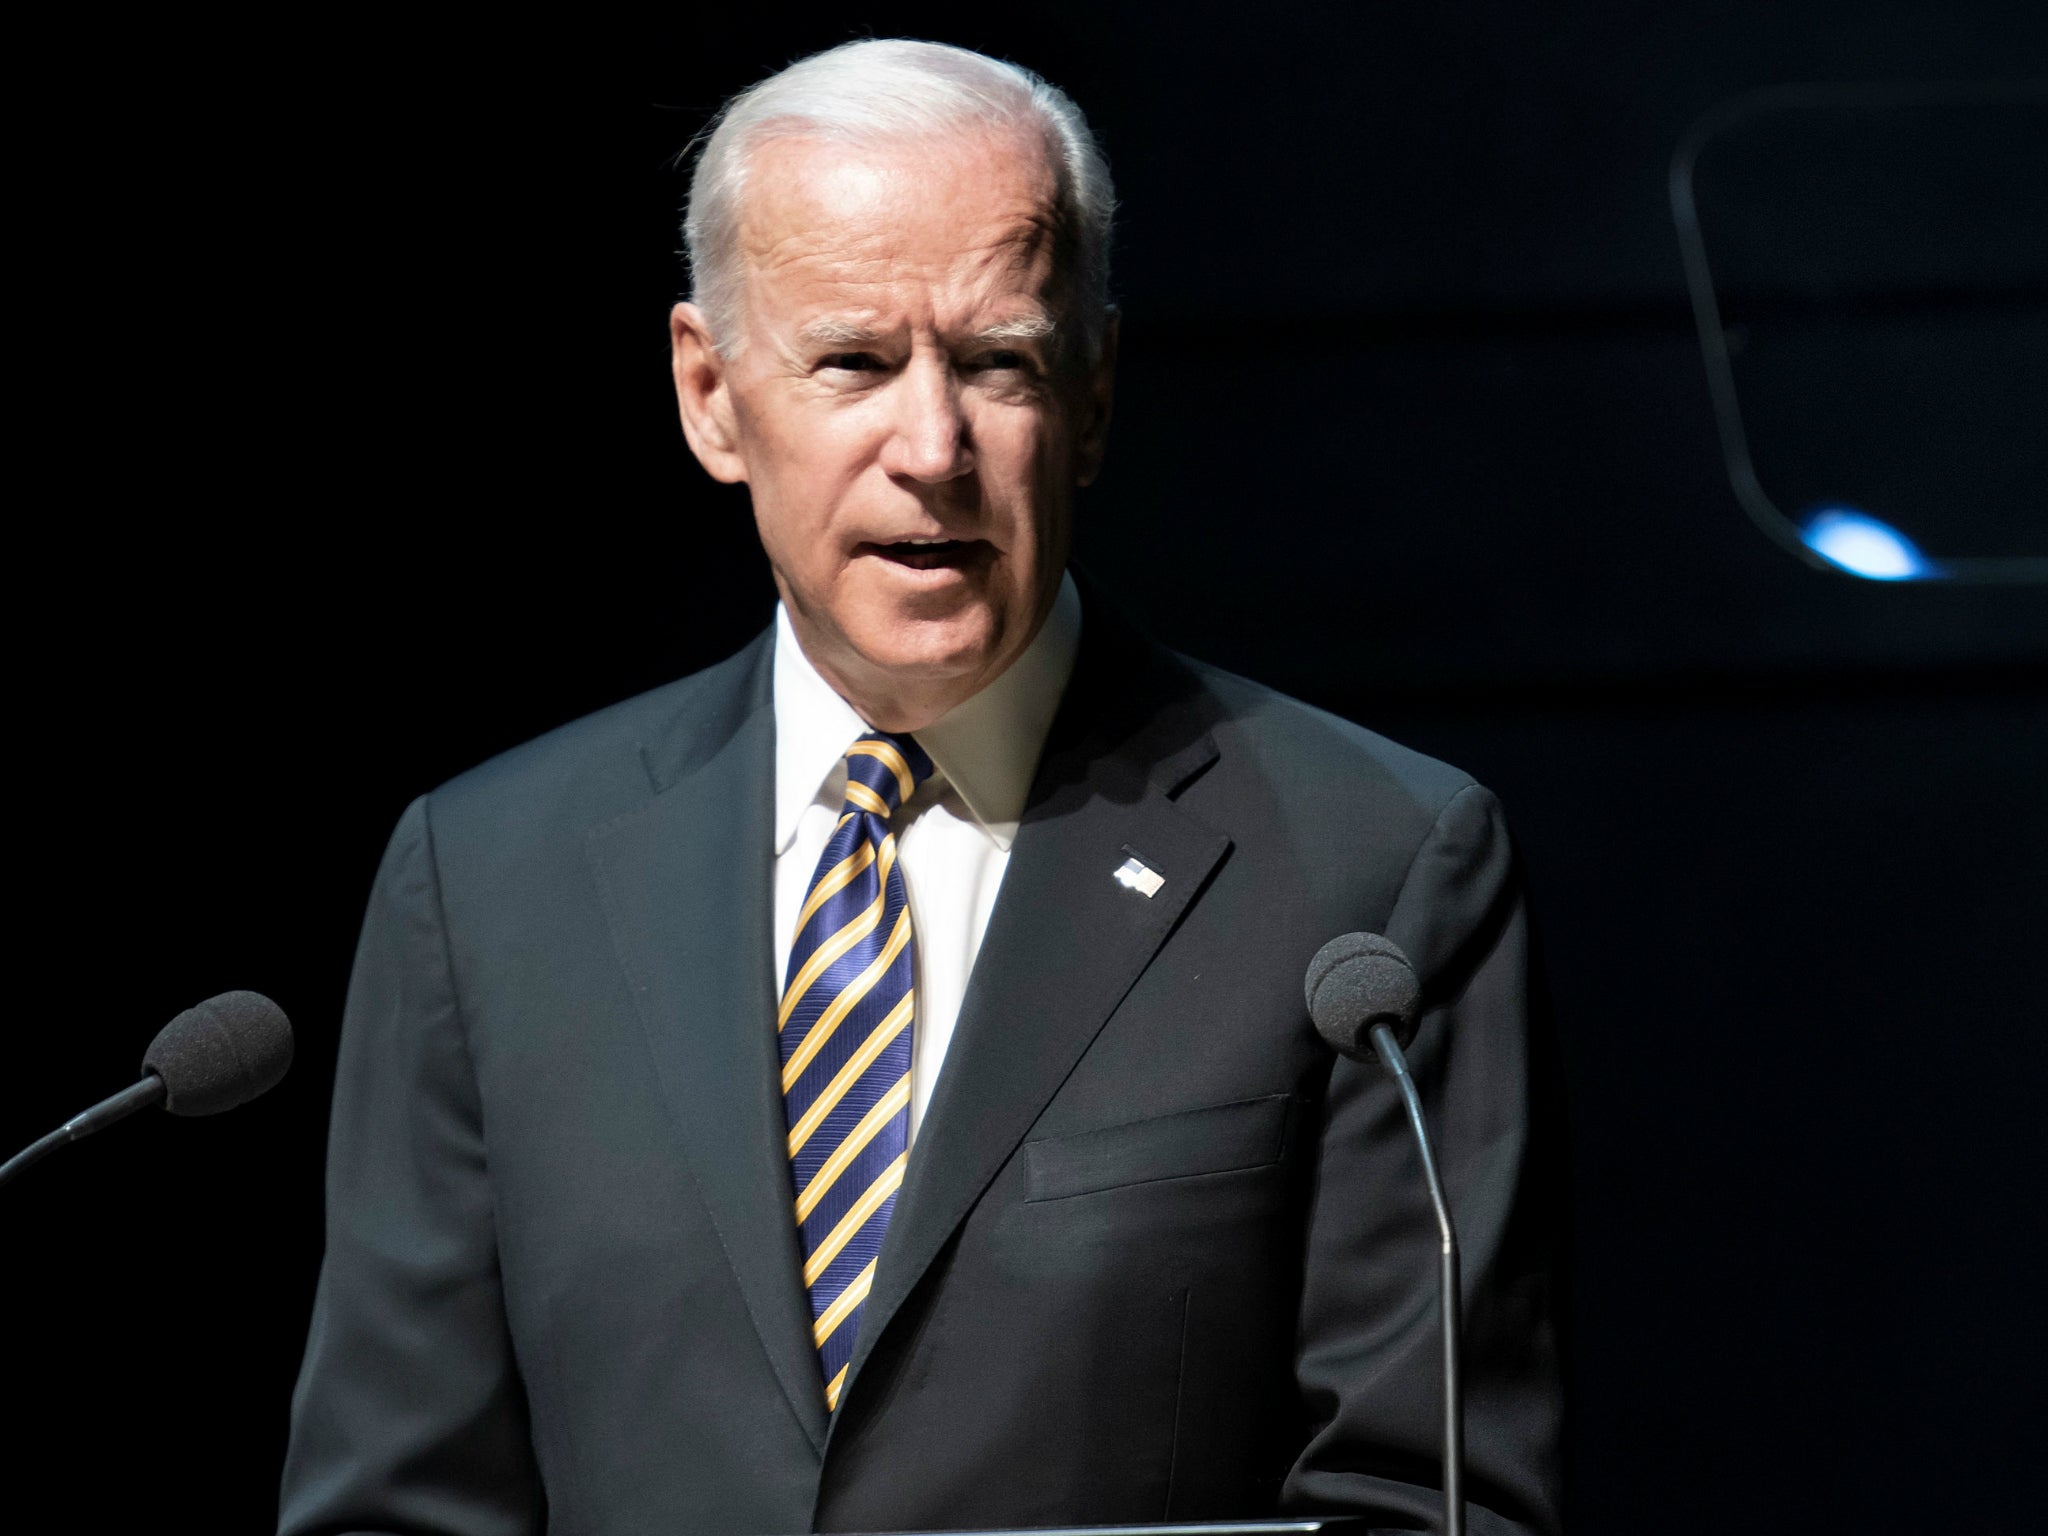 Joe Biden, 47th Vice President of the United States, is to decide by January whether he will run for president in 2020.